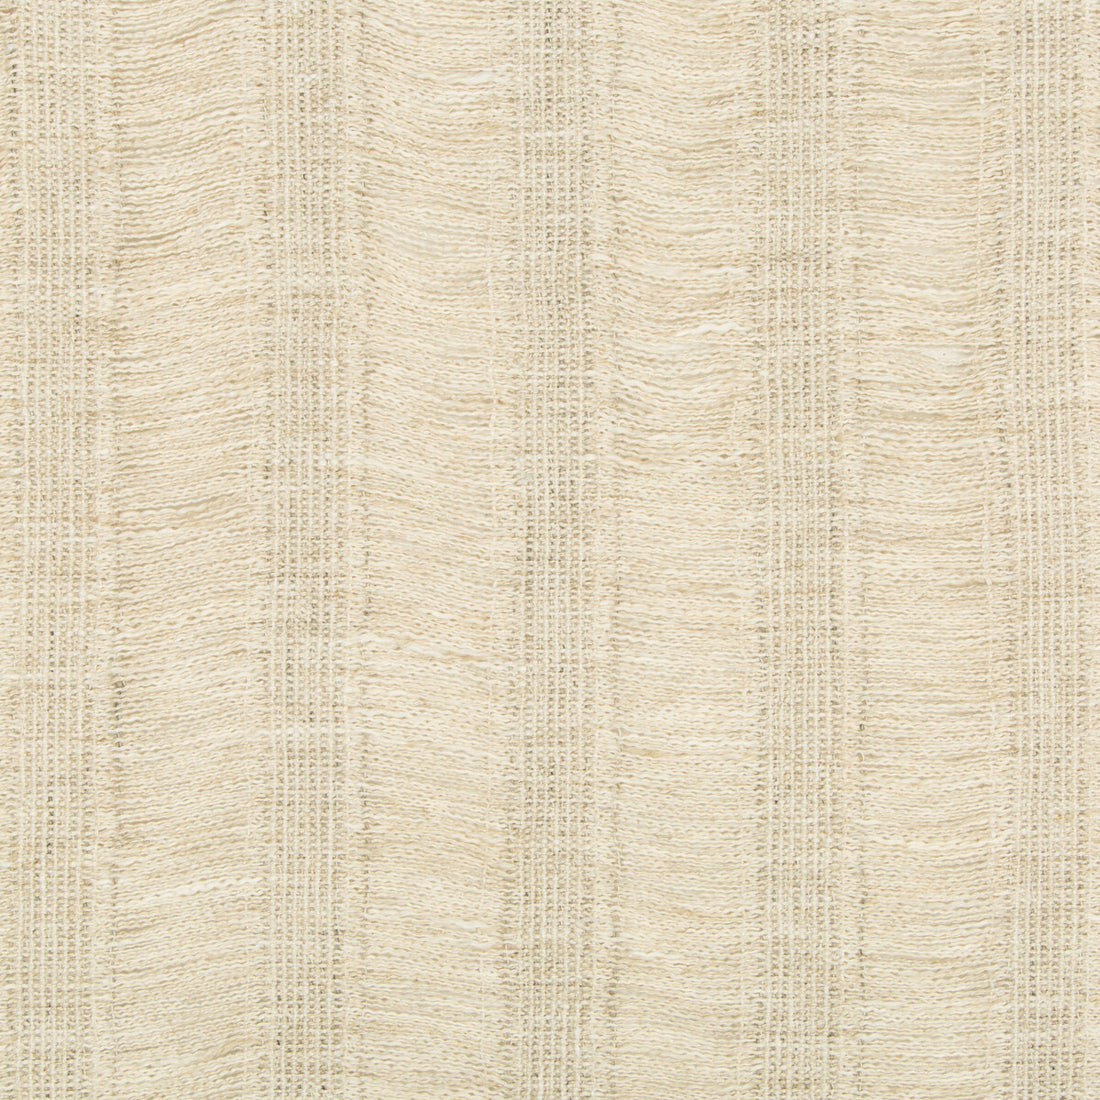 Kravet Couture fabric in 4227-116 color - pattern 4227.116.0 - by Kravet Couture